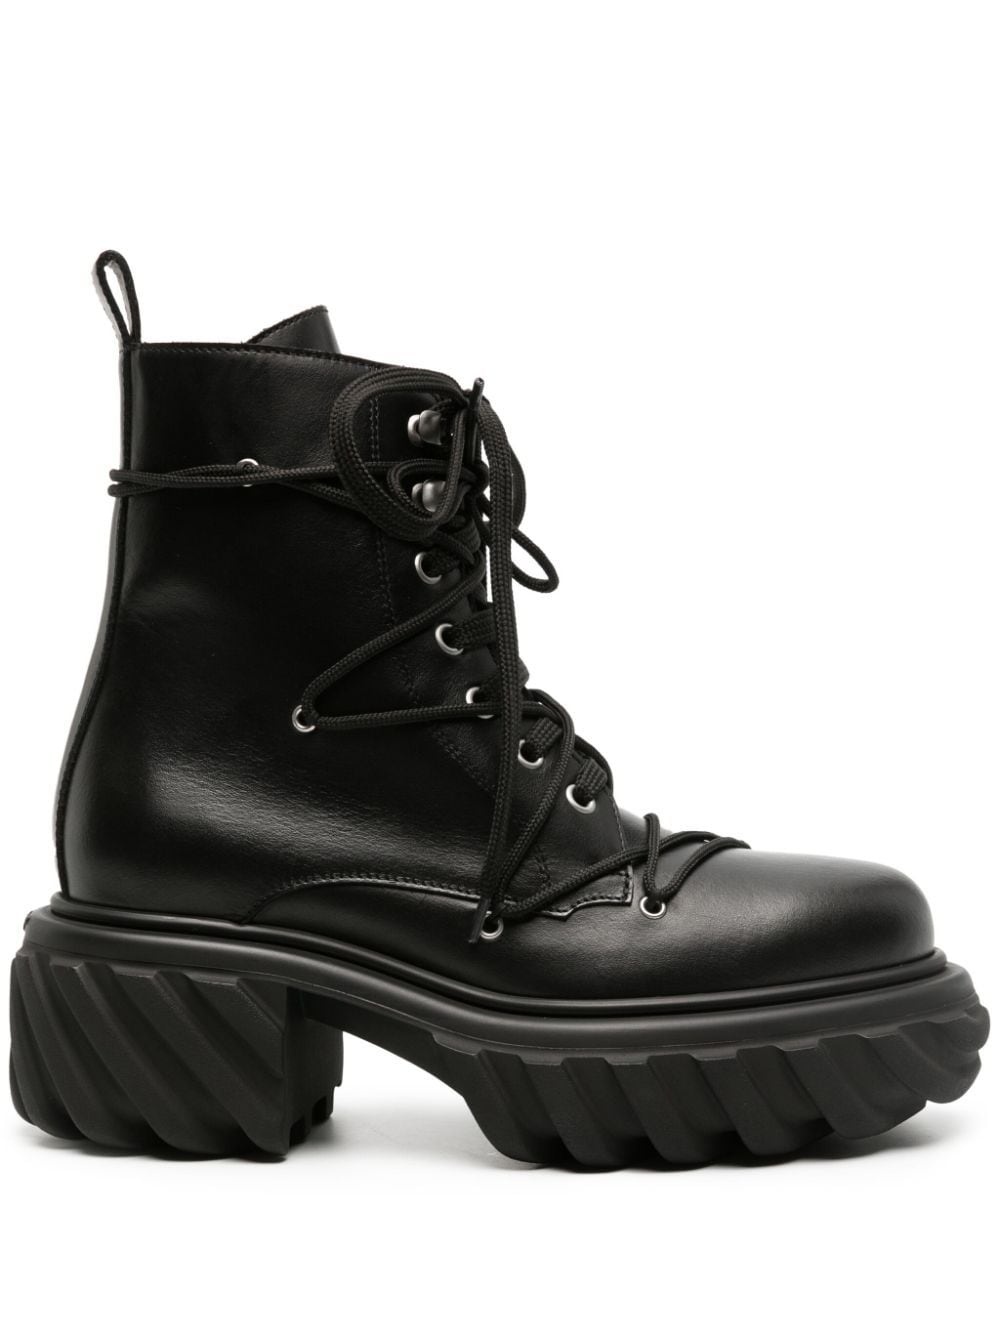 Tractor Motor leather boots - 1